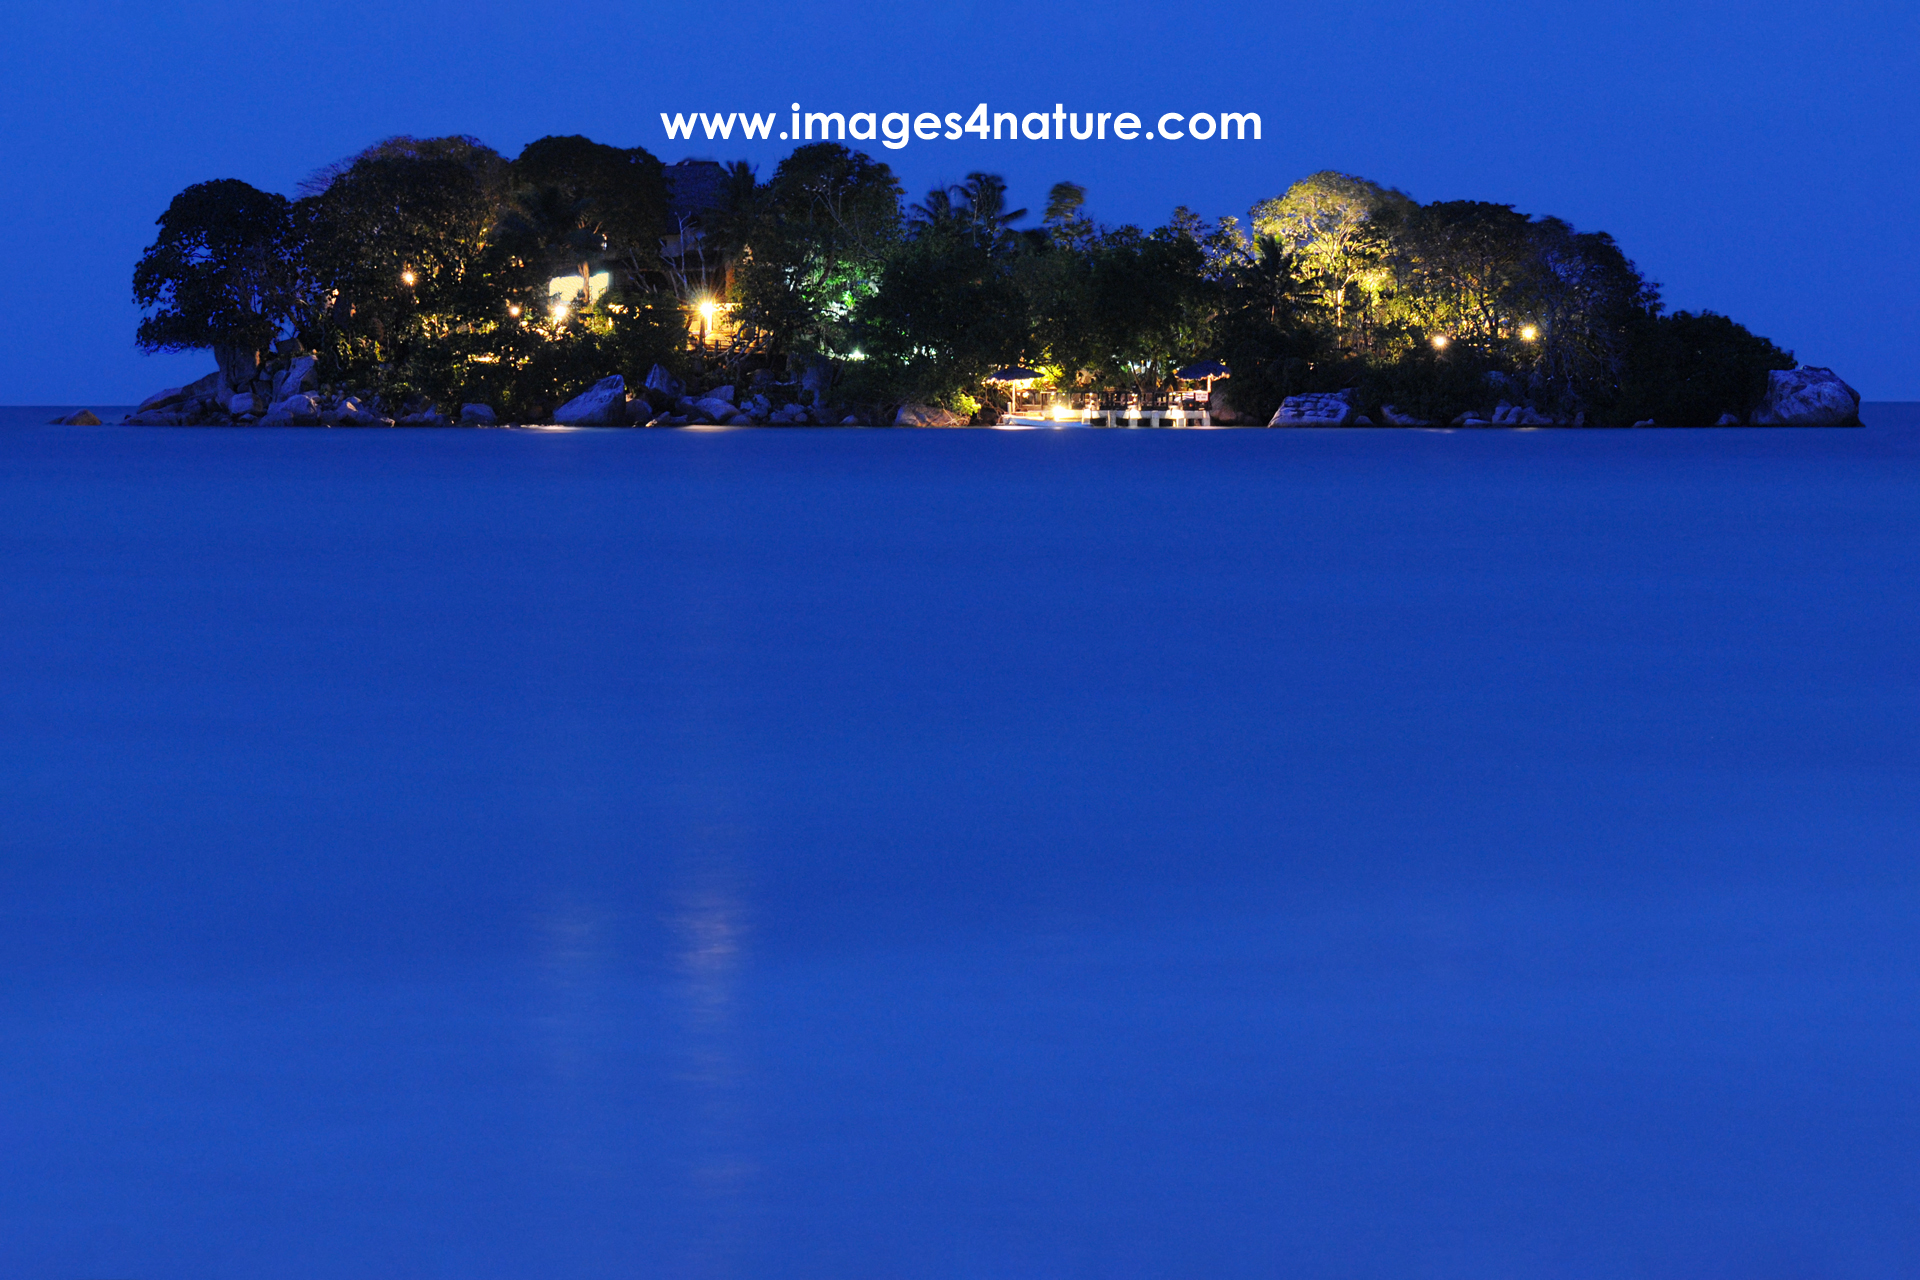 Blue hour view of small touristic island with buildings and trees